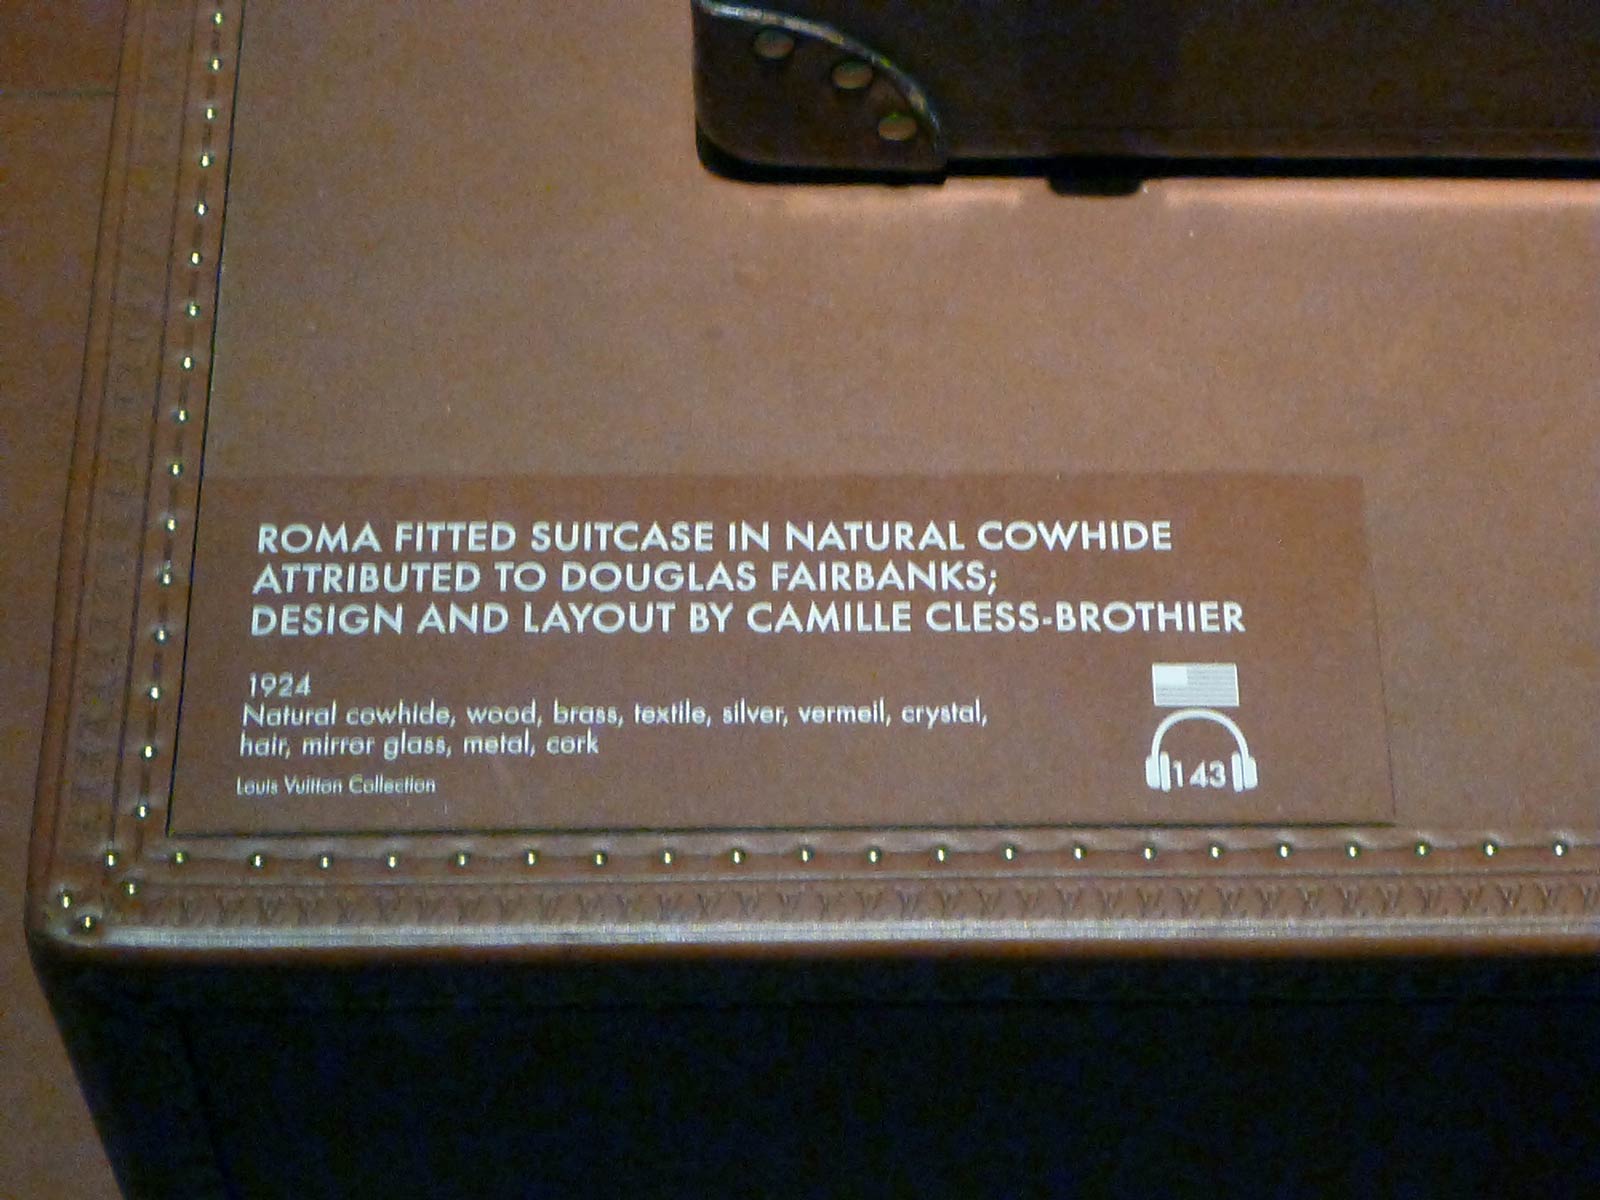 Louis Vuitton - Volez, Voguez, Voyagez exhibit, New York, NY. Custom dry transfer applied to leather placard reading, "ROMA FITTED SUITCASE IN NATURAL COWHIDE ATTRIBUTED TO DOUGLAS FAIRBANKS; DESIGN AND LAYOUT BY CAMILLE CLESS-BROTHIER".